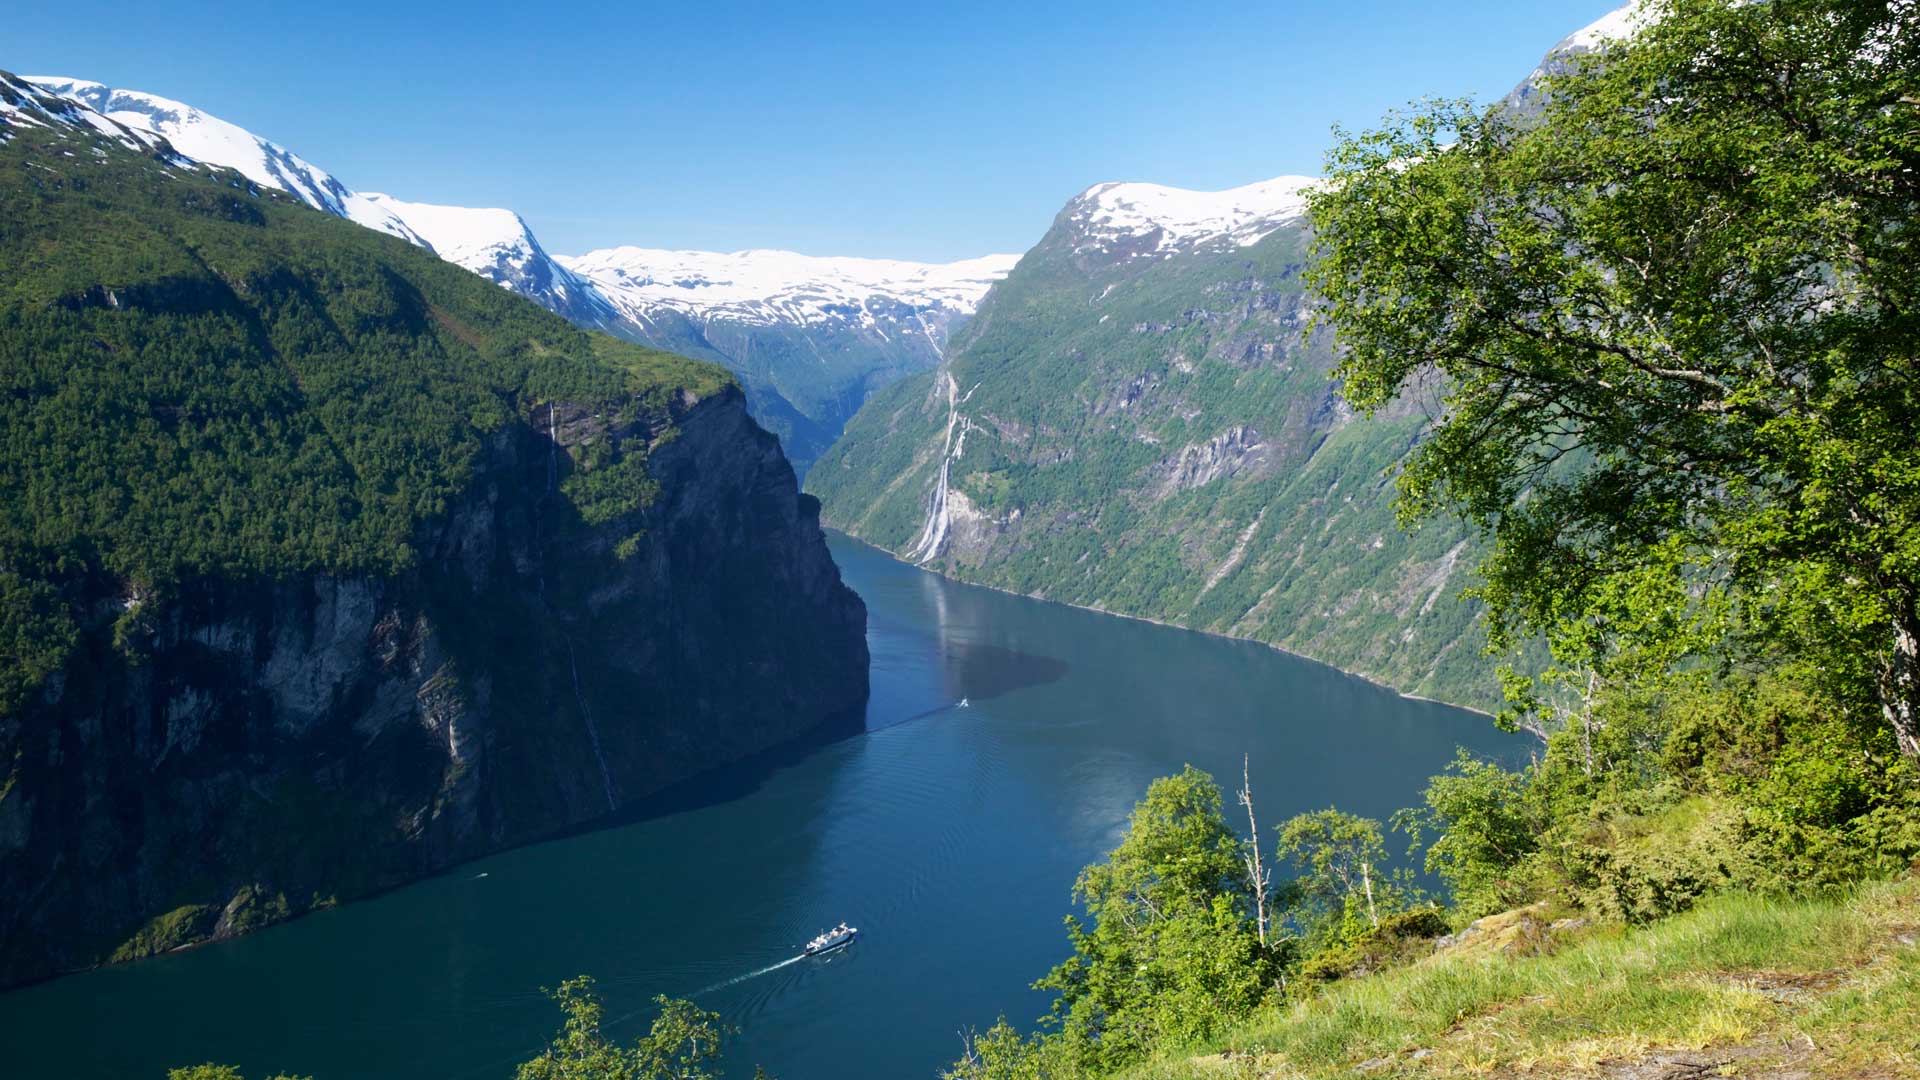 Geirangerfjord, a UNESCO World Heritage Site in Norway